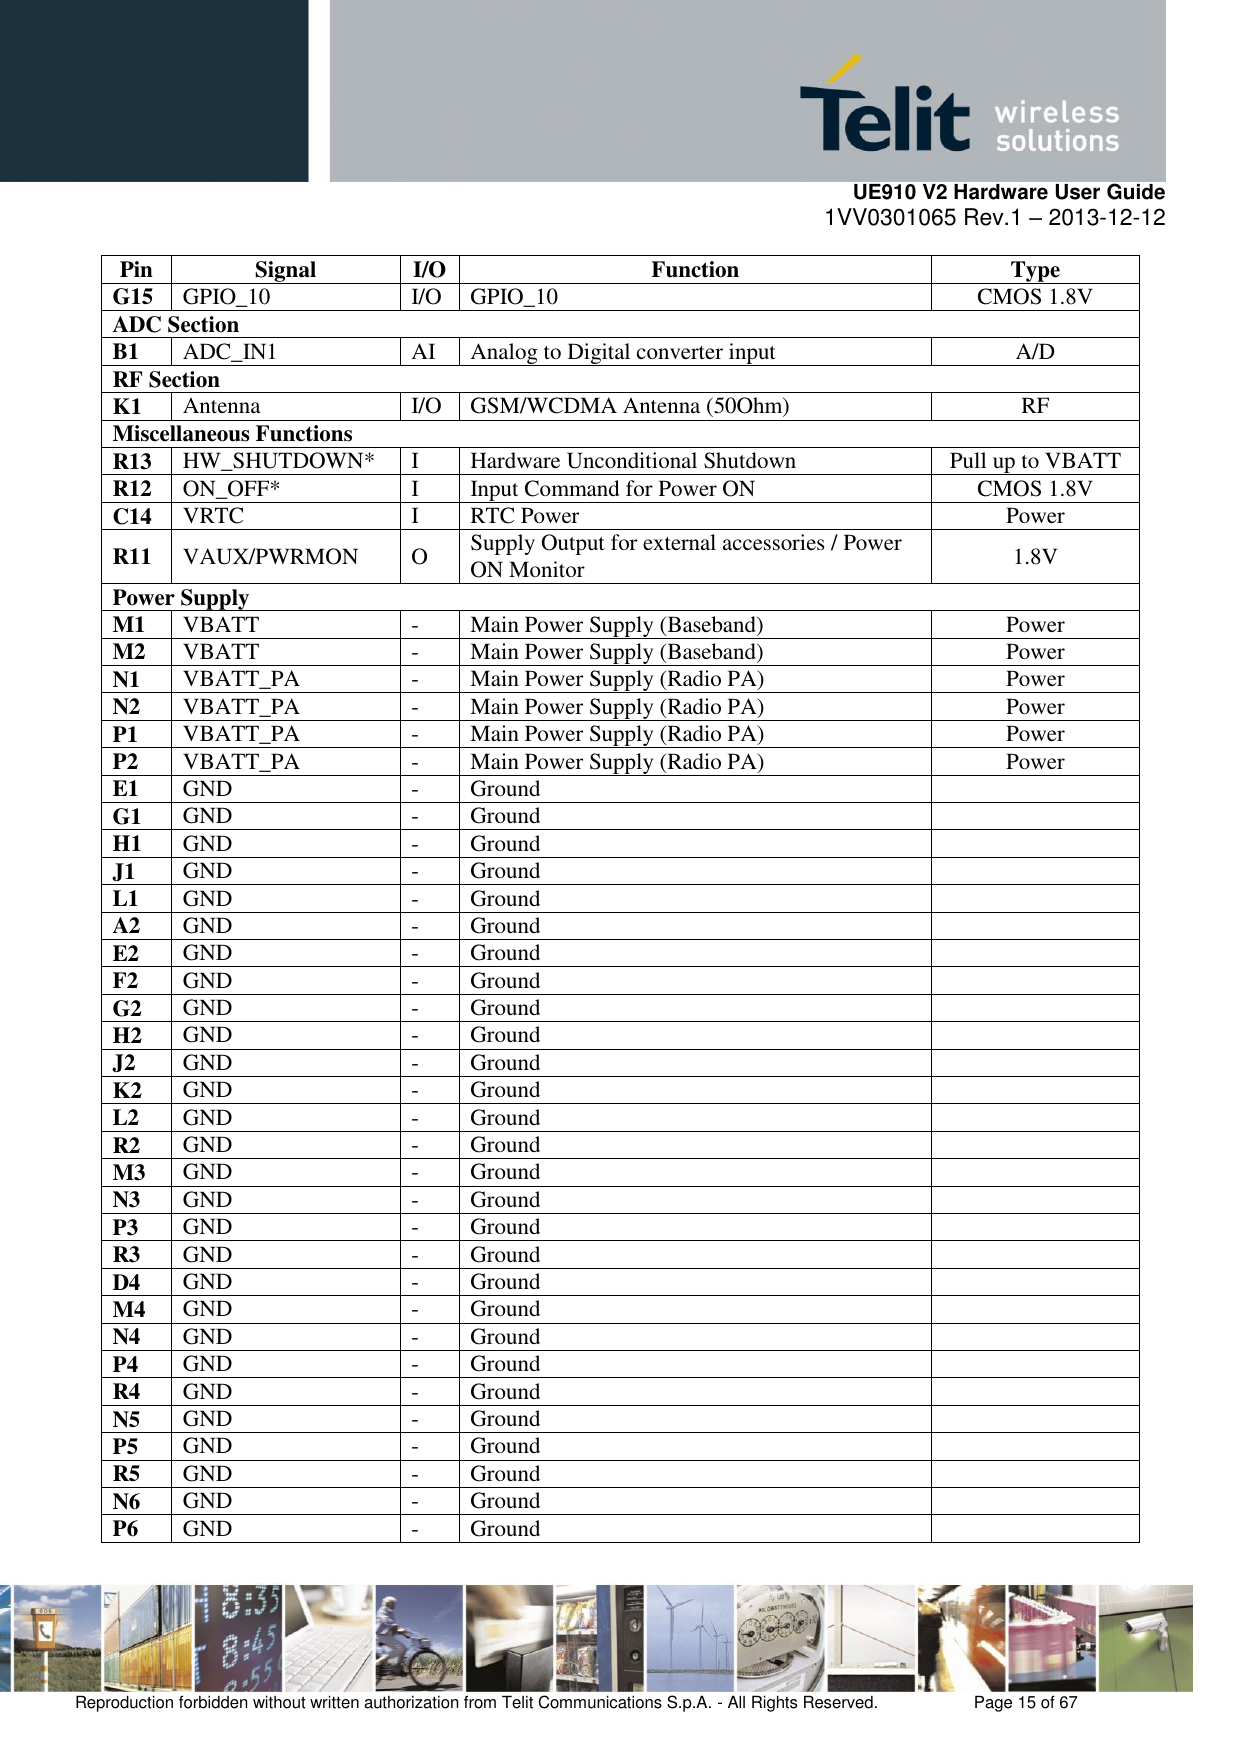     UE910 V2 Hardware User Guide 1VV0301065 Rev.1 – 2013-12-12  Reproduction forbidden without written authorization from Telit Communications S.p.A. - All Rights Reserved.    Page 15 of 67                                                     Pin Signal I/O Function Type G15 GPIO_10 I/O GPIO_10 CMOS 1.8V ADC Section  B1 ADC_IN1 AI Analog to Digital converter input A/D RF Section K1 Antenna I/O GSM/WCDMA Antenna (50Ohm) RF Miscellaneous Functions R13 HW_SHUTDOWN* I Hardware Unconditional Shutdown Pull up to VBATT R12 ON_OFF* I Input Command for Power ON CMOS 1.8V C14 VRTC I RTC Power Power R11 VAUX/PWRMON O Supply Output for external accessories / Power ON Monitor 1.8V Power Supply M1 VBATT - Main Power Supply (Baseband) Power M2 VBATT - Main Power Supply (Baseband) Power N1 VBATT_PA - Main Power Supply (Radio PA) Power N2 VBATT_PA - Main Power Supply (Radio PA) Power P1 VBATT_PA - Main Power Supply (Radio PA) Power P2 VBATT_PA - Main Power Supply (Radio PA) Power E1 GND - Ground  G1 GND - Ground  H1 GND - Ground  J1 GND - Ground  L1 GND - Ground  A2 GND - Ground  E2 GND - Ground  F2 GND - Ground  G2 GND - Ground  H2 GND - Ground  J2 GND - Ground  K2 GND - Ground  L2 GND - Ground  R2 GND - Ground  M3 GND - Ground  N3 GND - Ground  P3 GND - Ground  R3 GND - Ground  D4 GND - Ground  M4 GND - Ground  N4 GND - Ground  P4 GND - Ground  R4 GND - Ground  N5 GND - Ground  P5 GND - Ground  R5 GND - Ground  N6 GND - Ground  P6 GND - Ground  